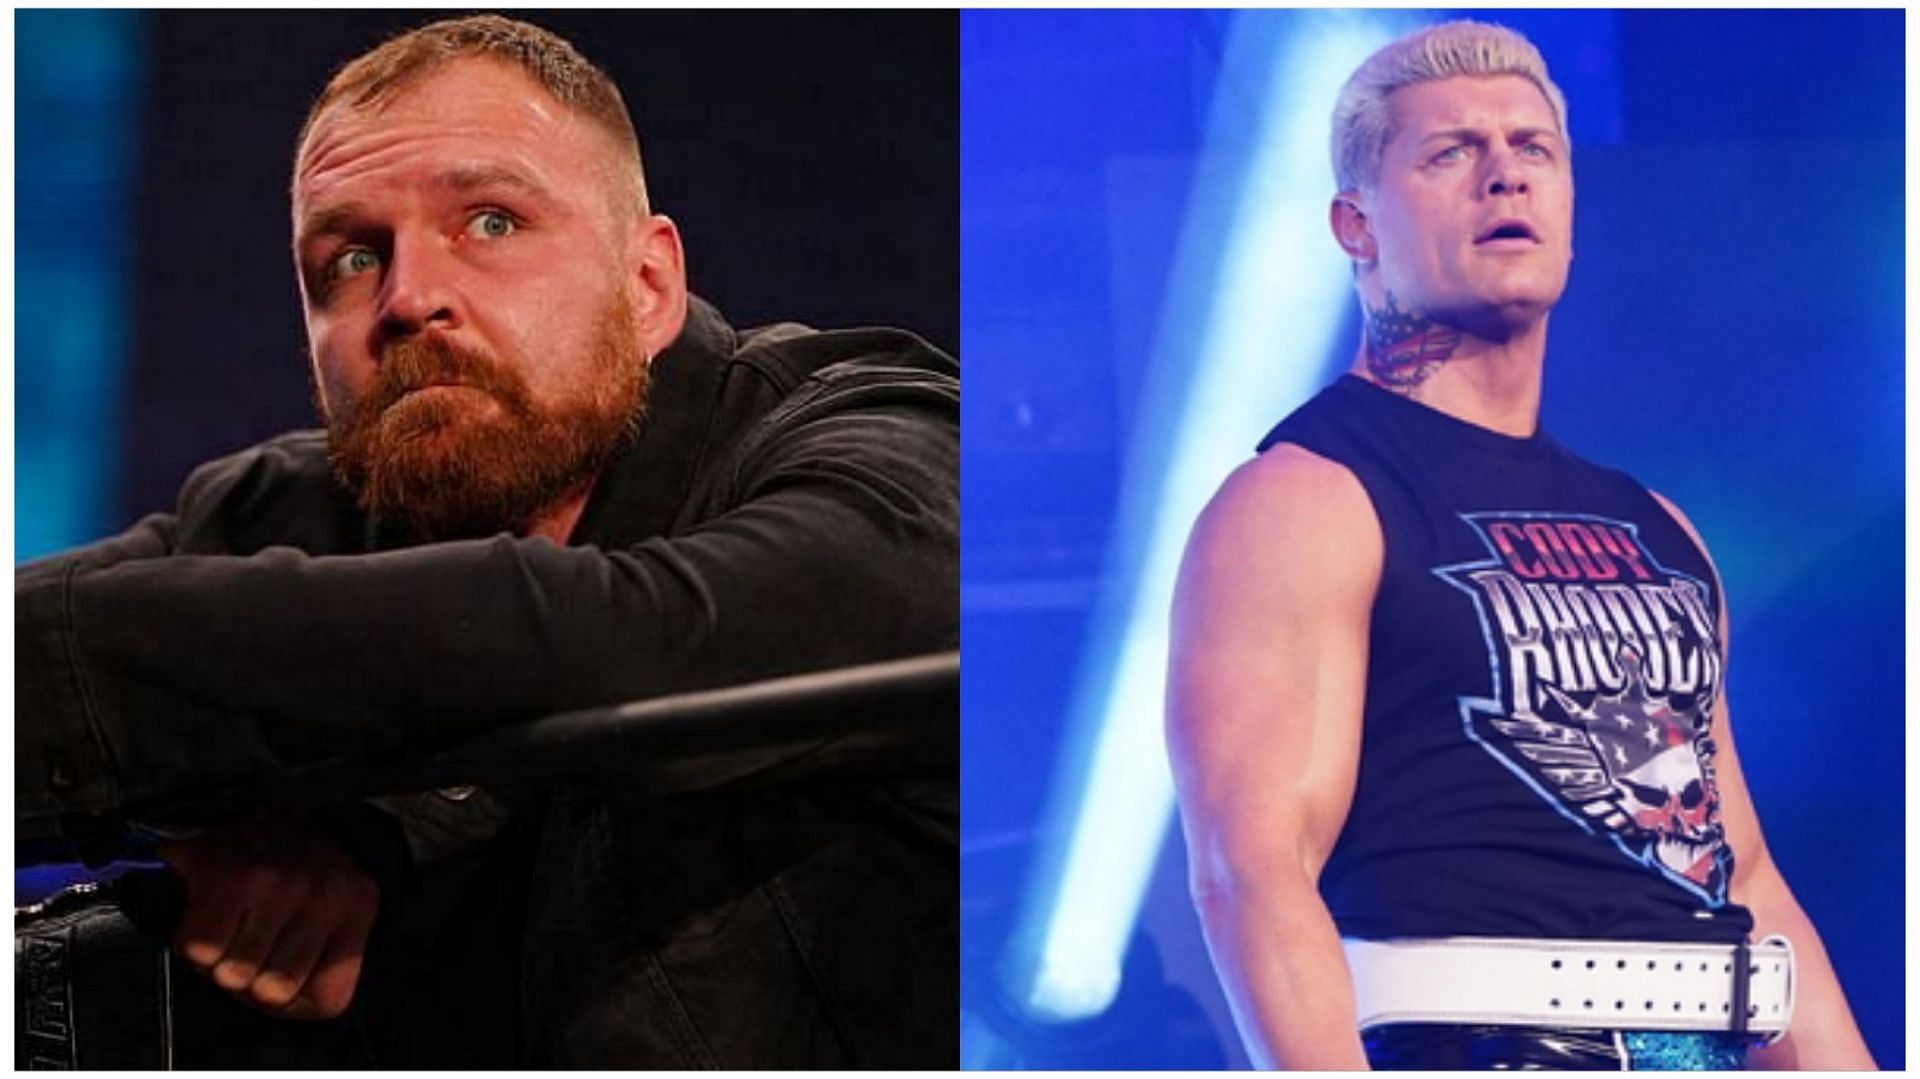 AEW stars Jon Moxley (left) and Cody Rhodes (right)